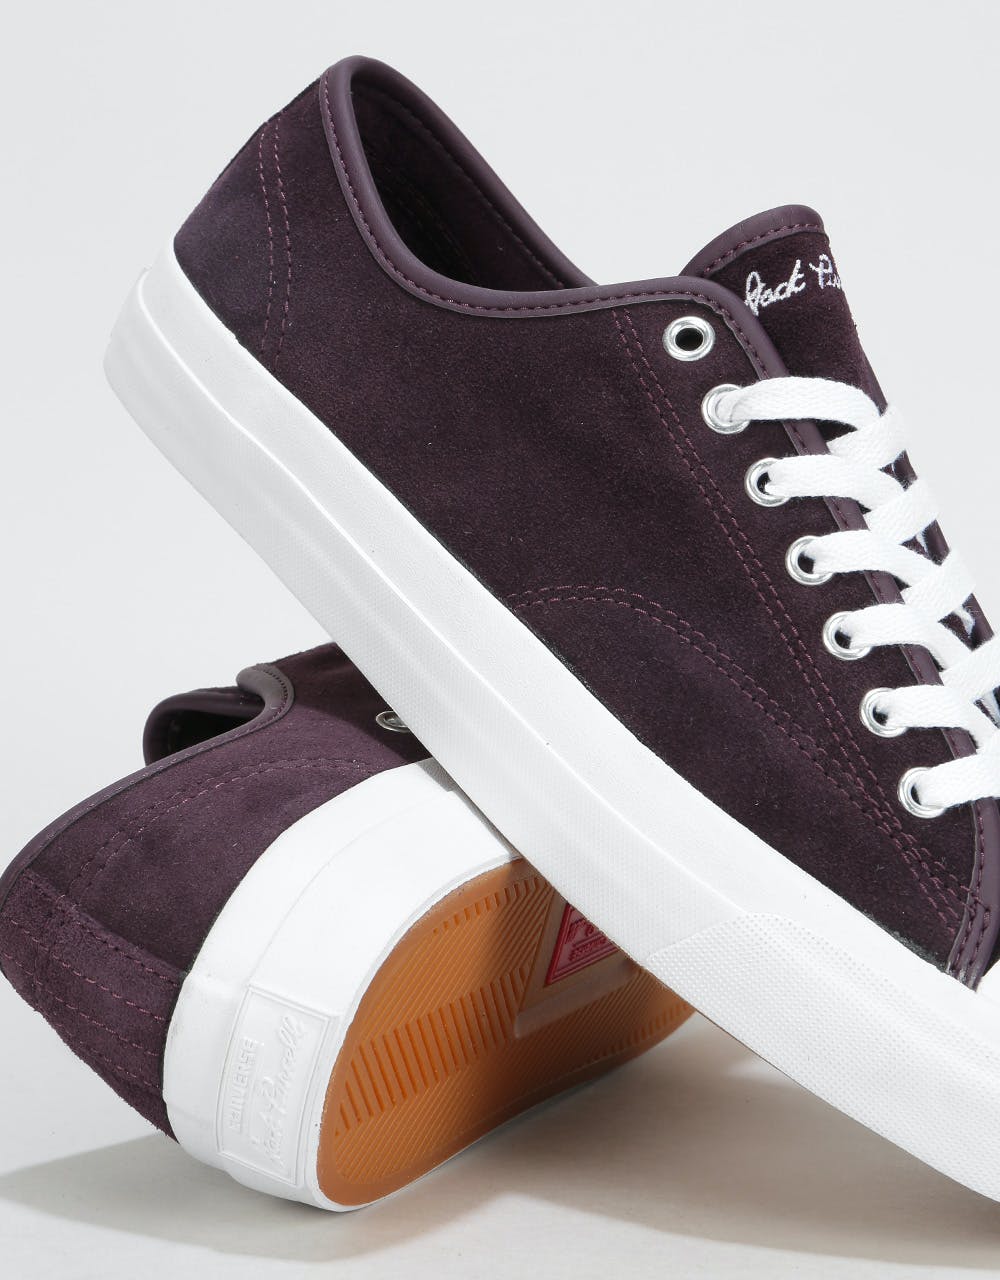 Converse Jack Purcell Pro Ox Skate Shoes - Black Cherry/White/White